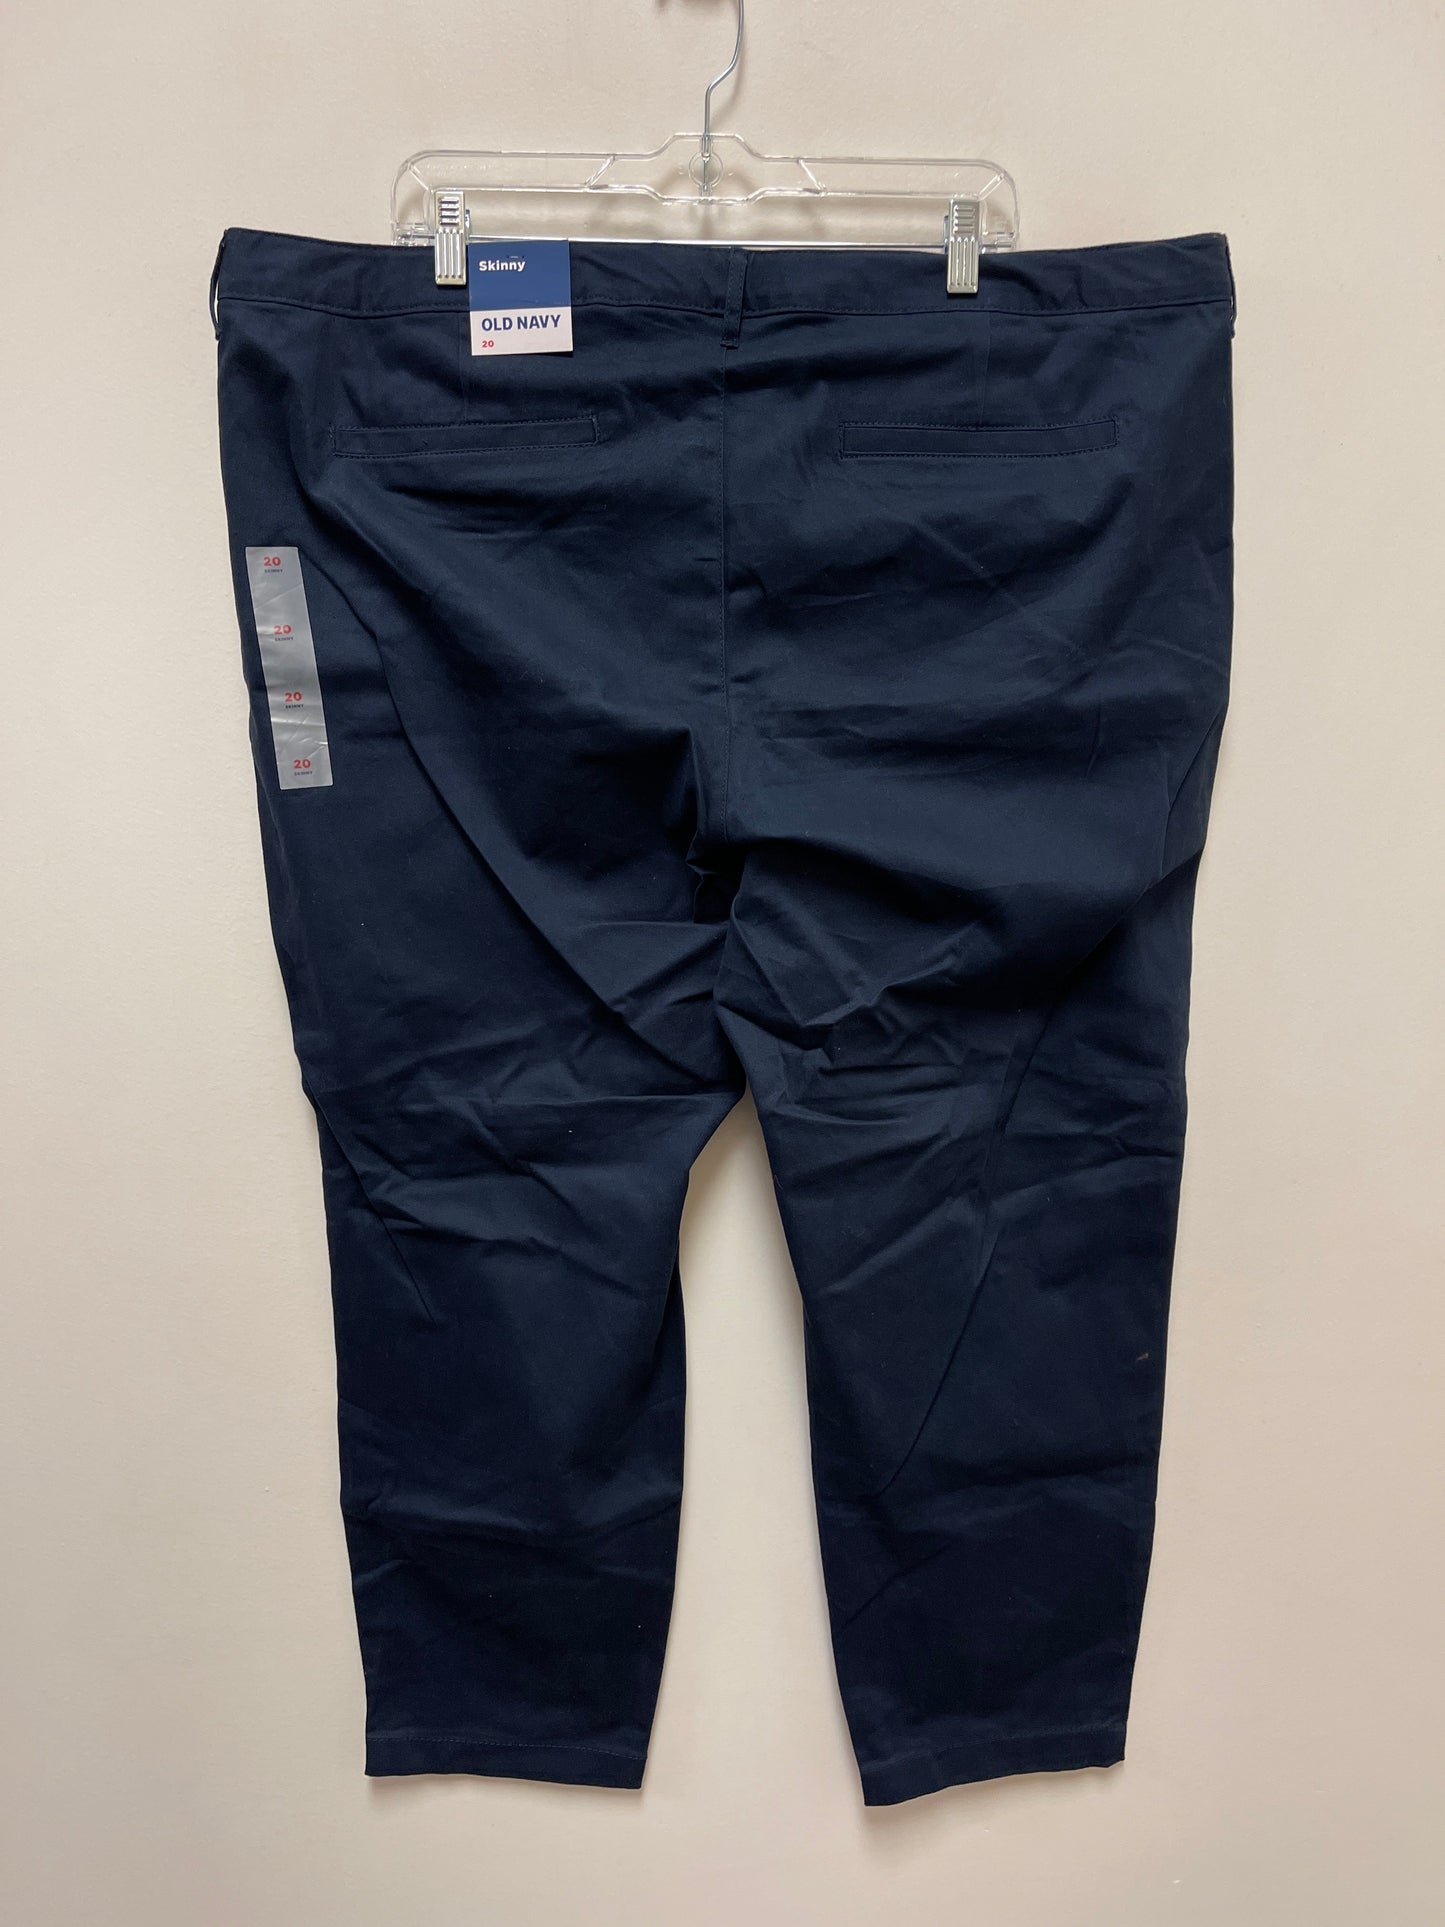 Navy Pants Chinos & Khakis Old Navy, Size 2x